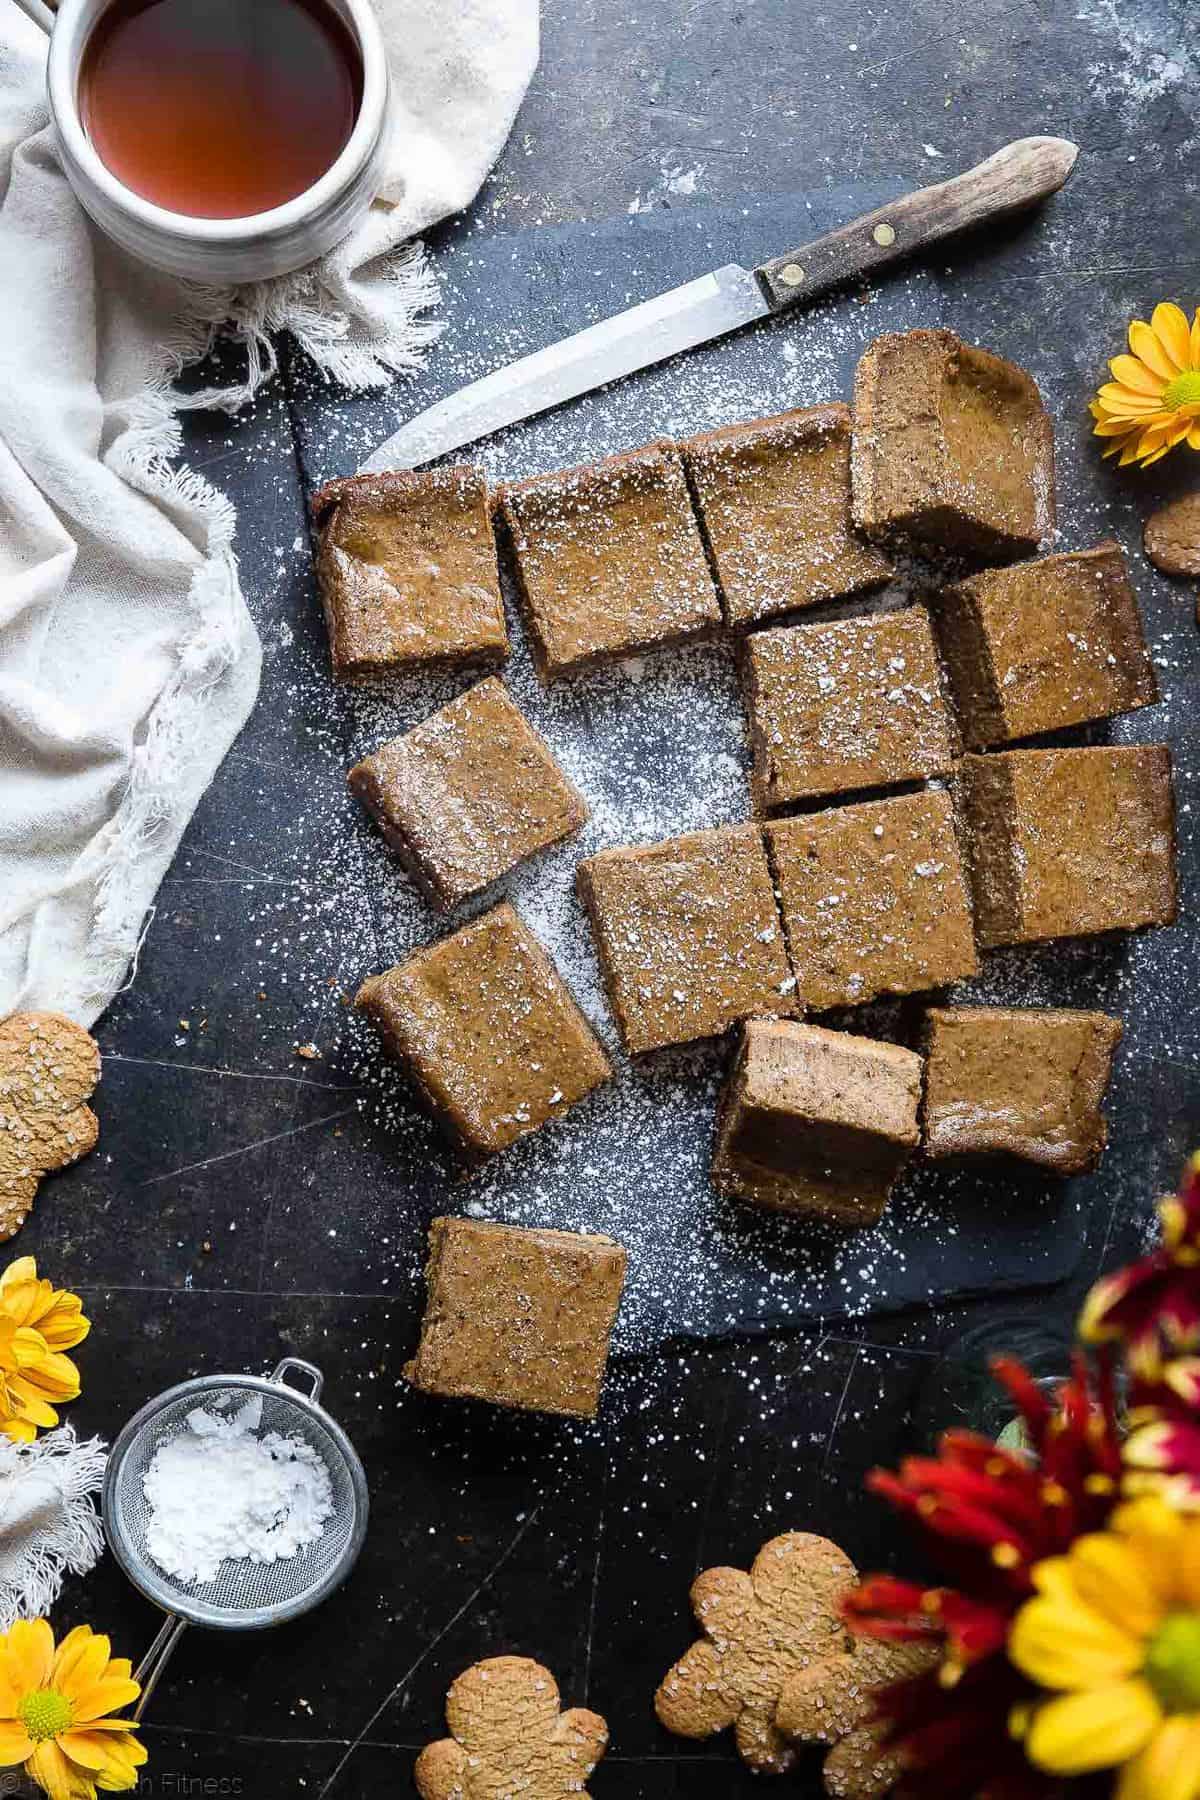 Gingerbread Dairy Free Paleo Cheesecake Bars - These little bites of gingerbread bliss are SO creamy and spicy-sweet! A paleo friendly, healthy and gluten free dessert for the holidays that you will never believe is dairy and egg free!  | Foodfaithfitness.com | @FoodFaithFit